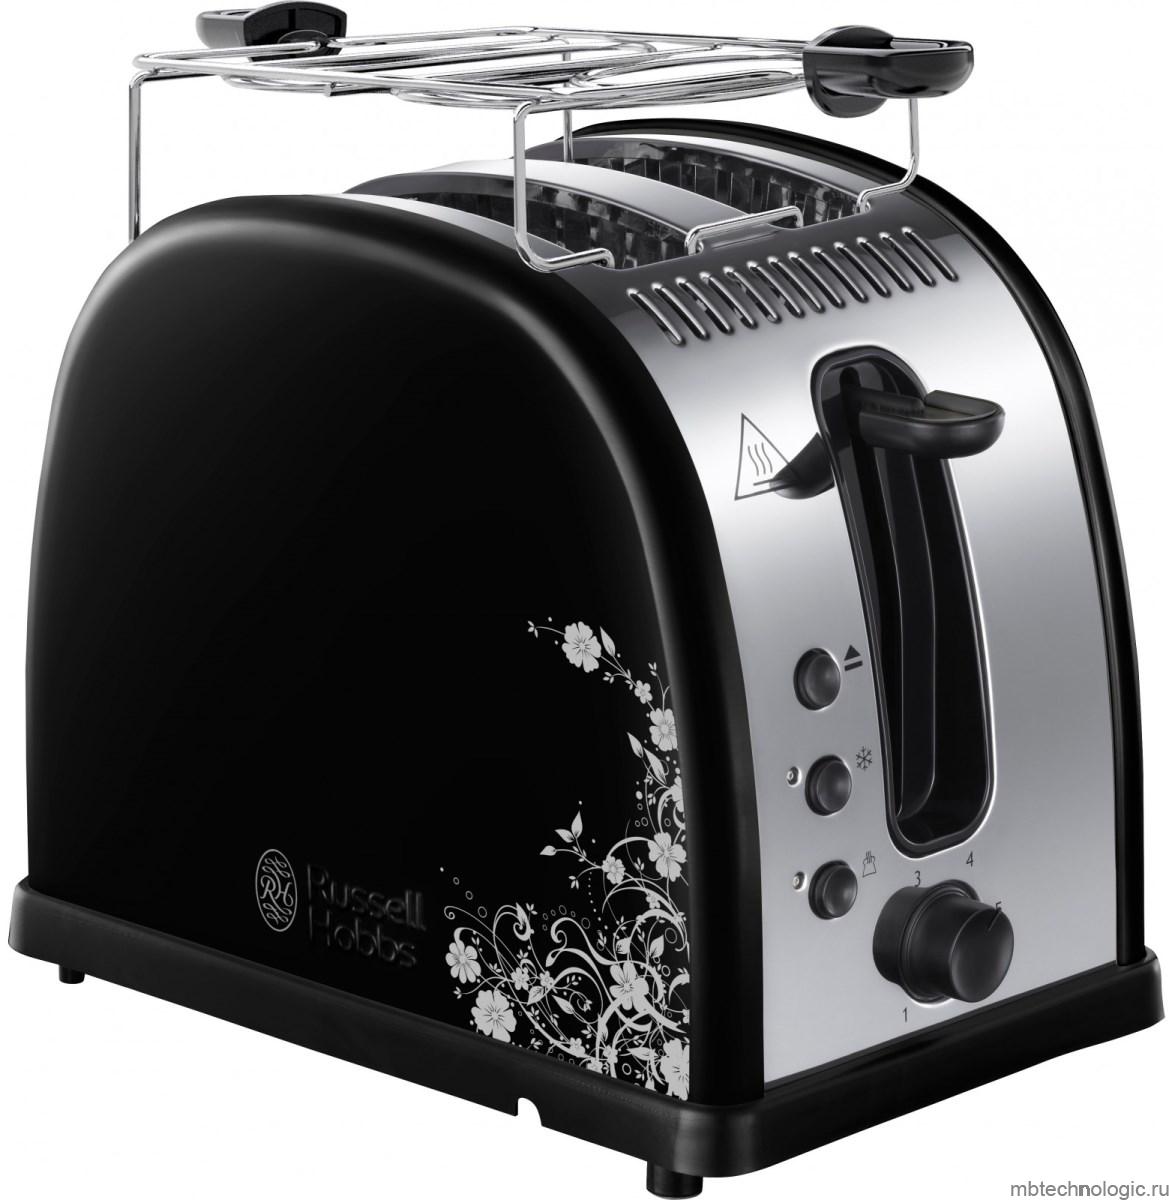 Russell Hobbs Legacy Floral 21971-56